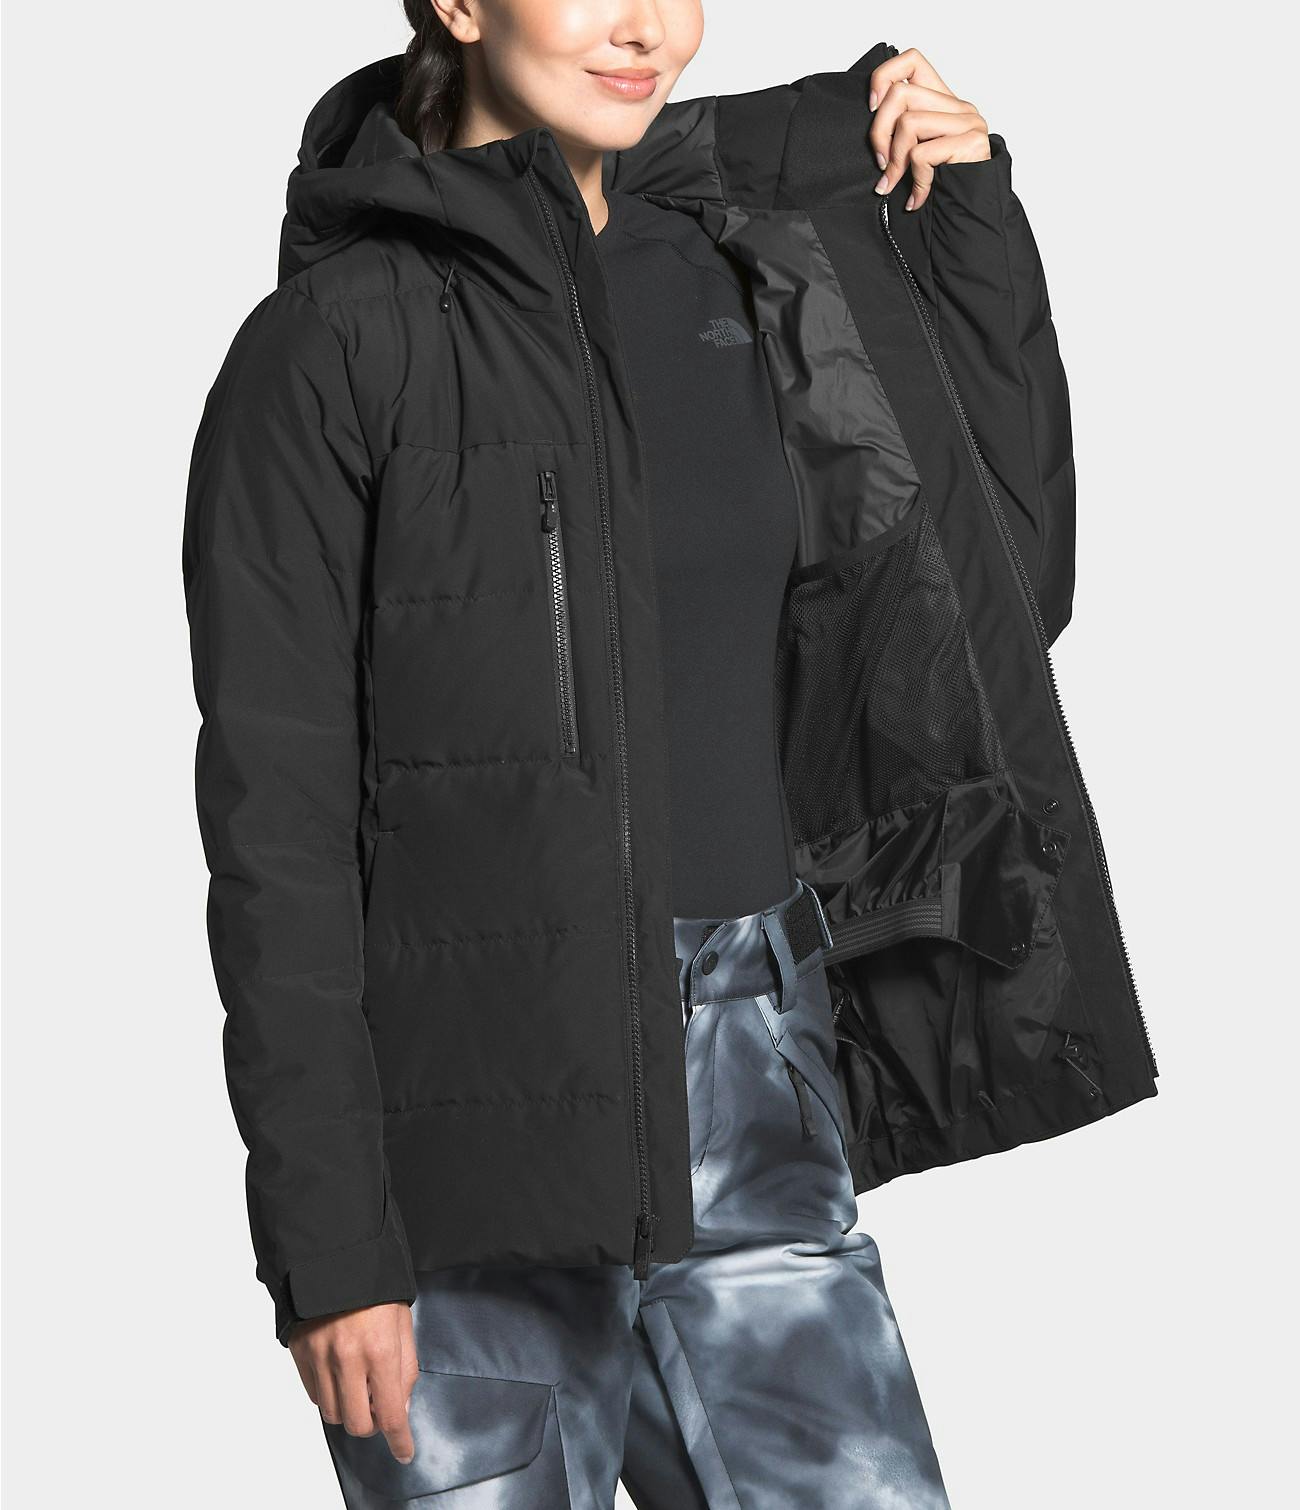 The North Face Women's Corefire Down Jacket